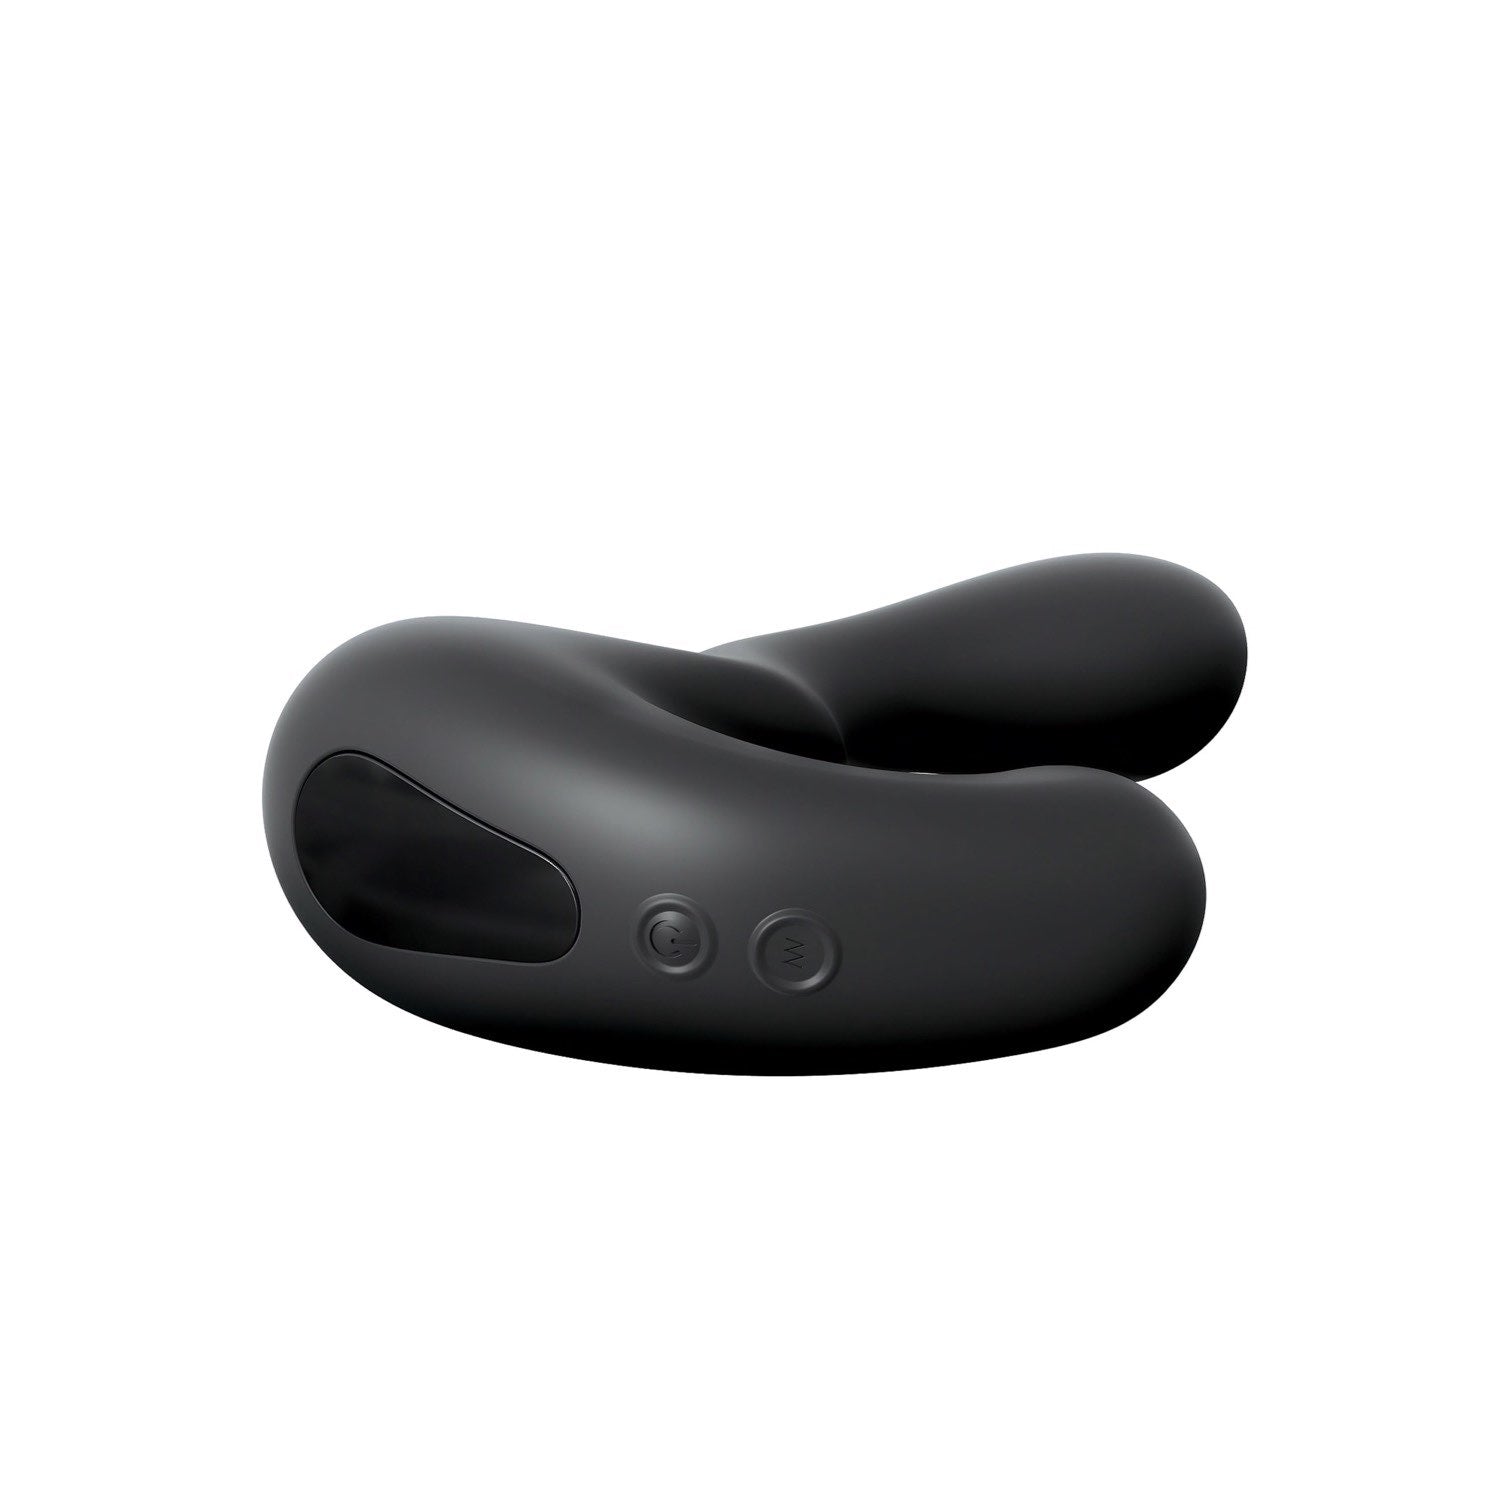 Anal Fantasy Elite Collection Ultimate P-Spot Milker - Black USB Rechargeable Vibrating Prostate Massager by Pipedream